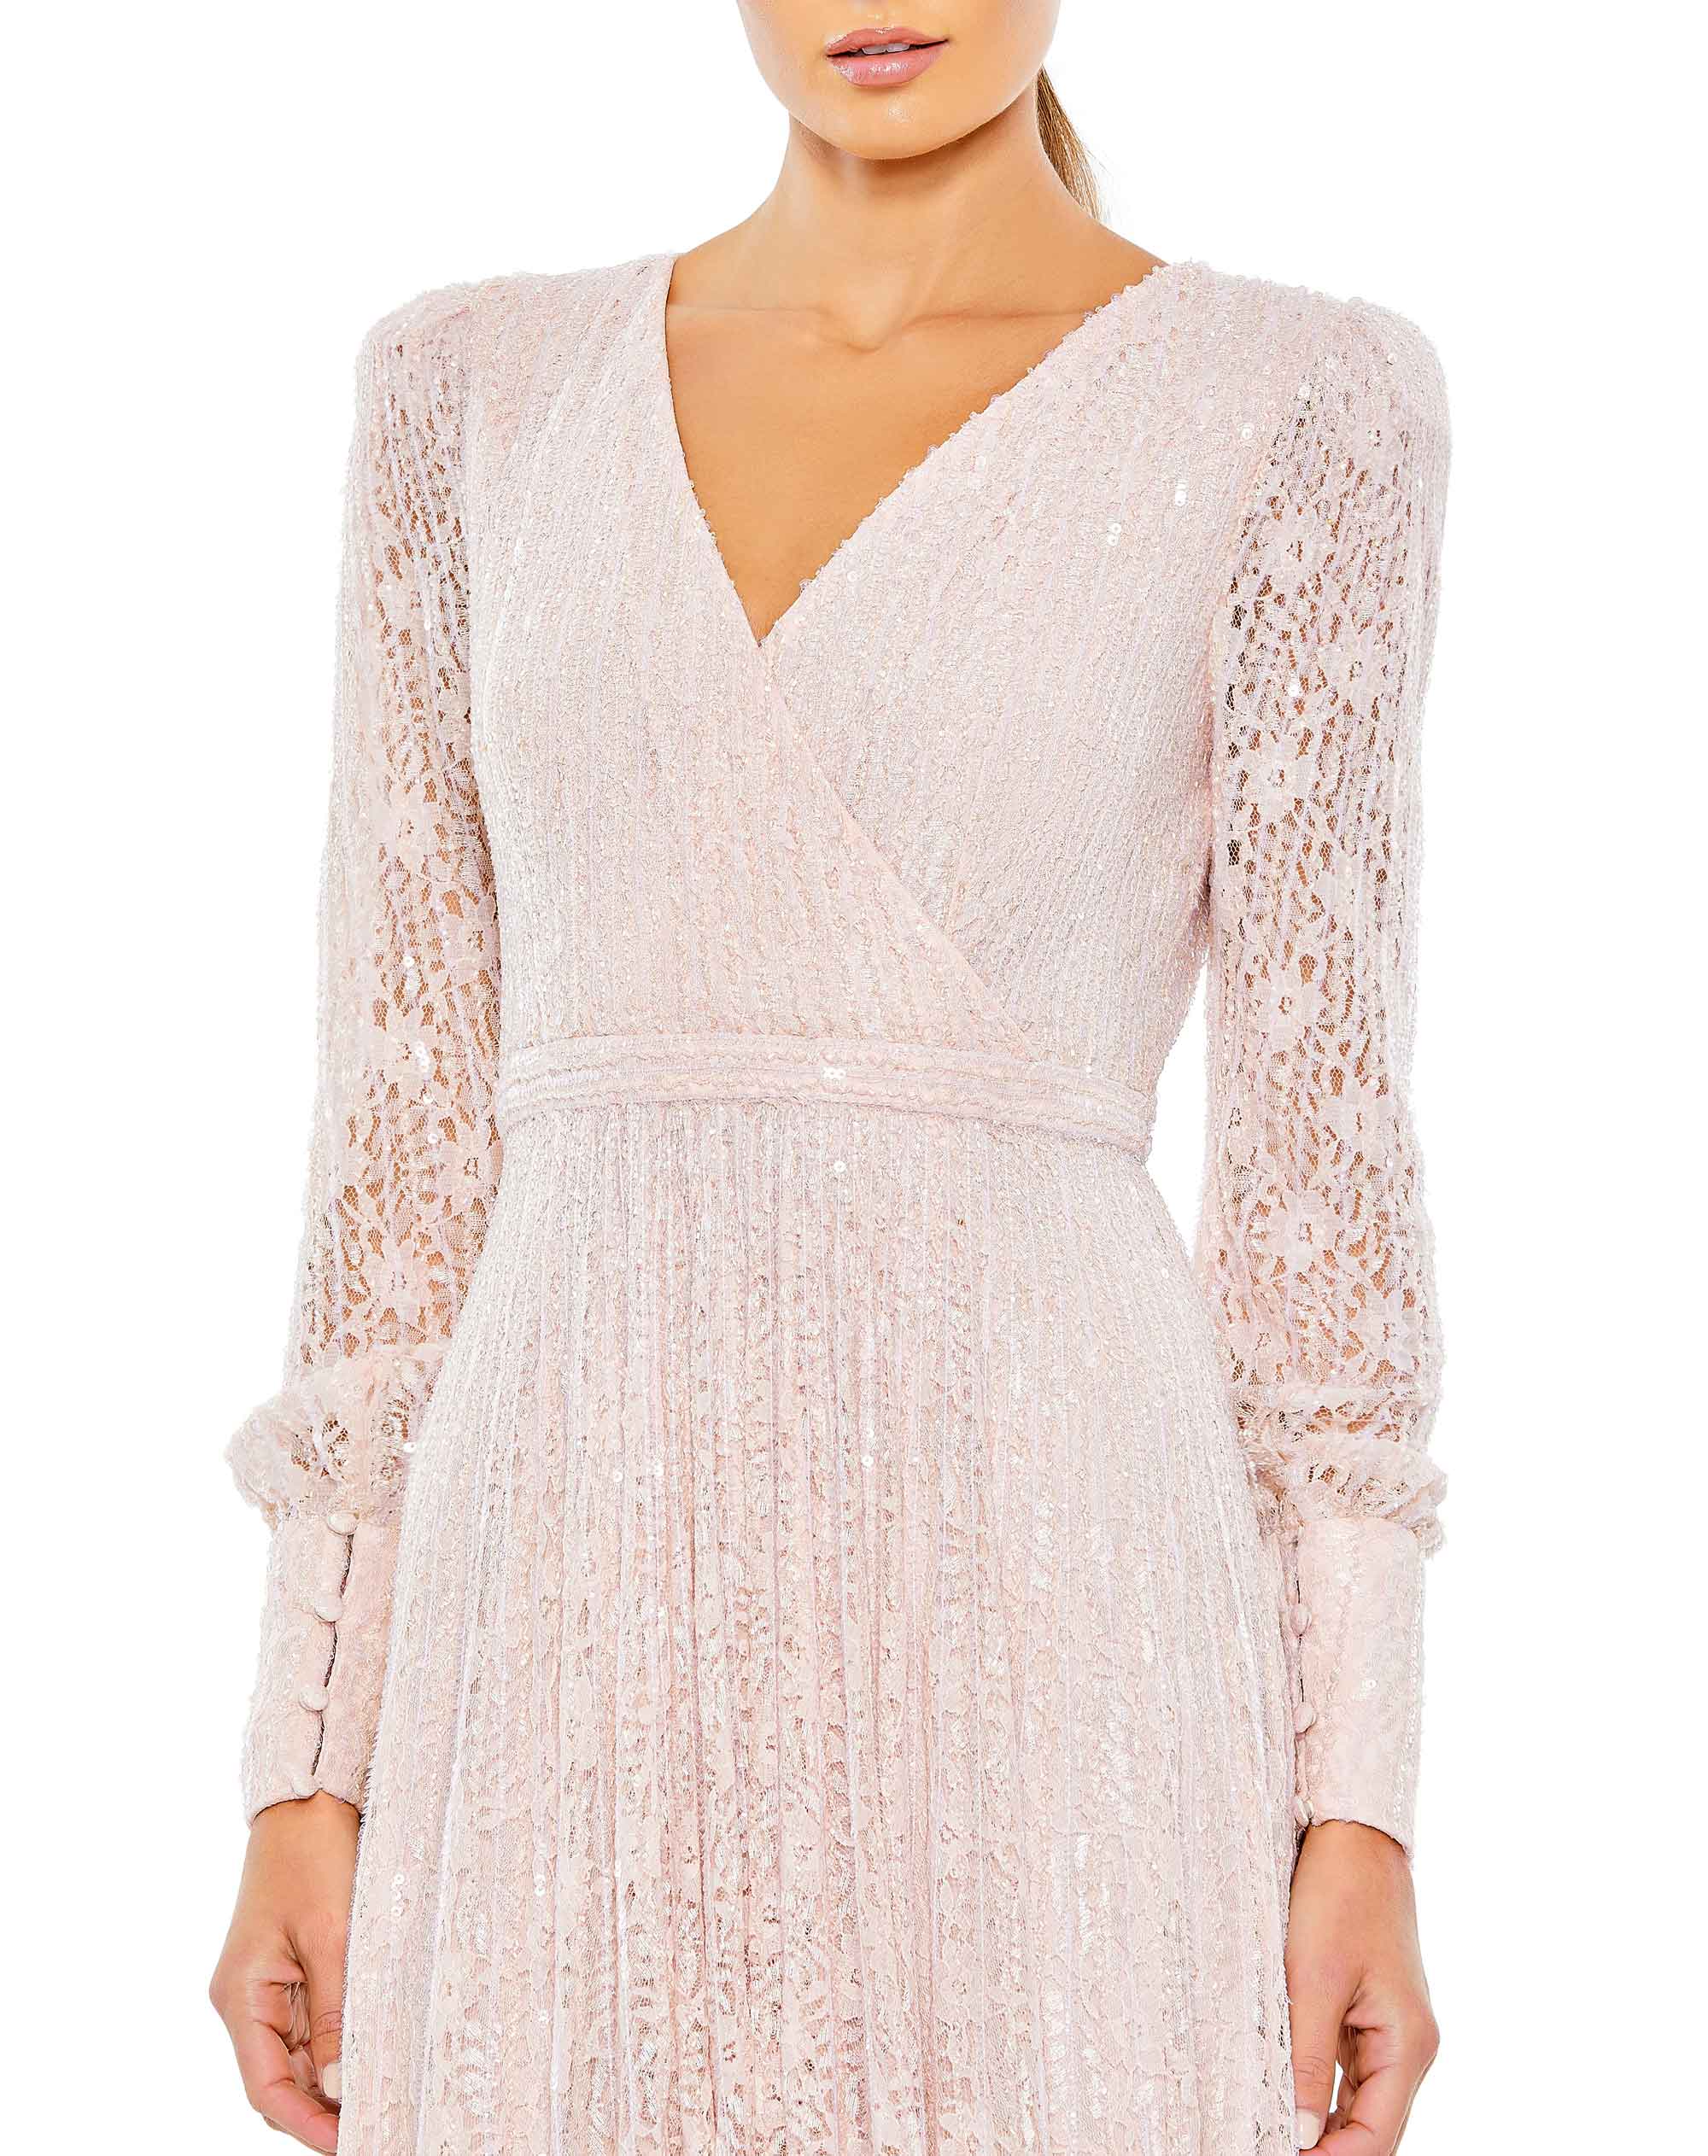 Beaded Lace Long Sleeve Wrap Over Gown